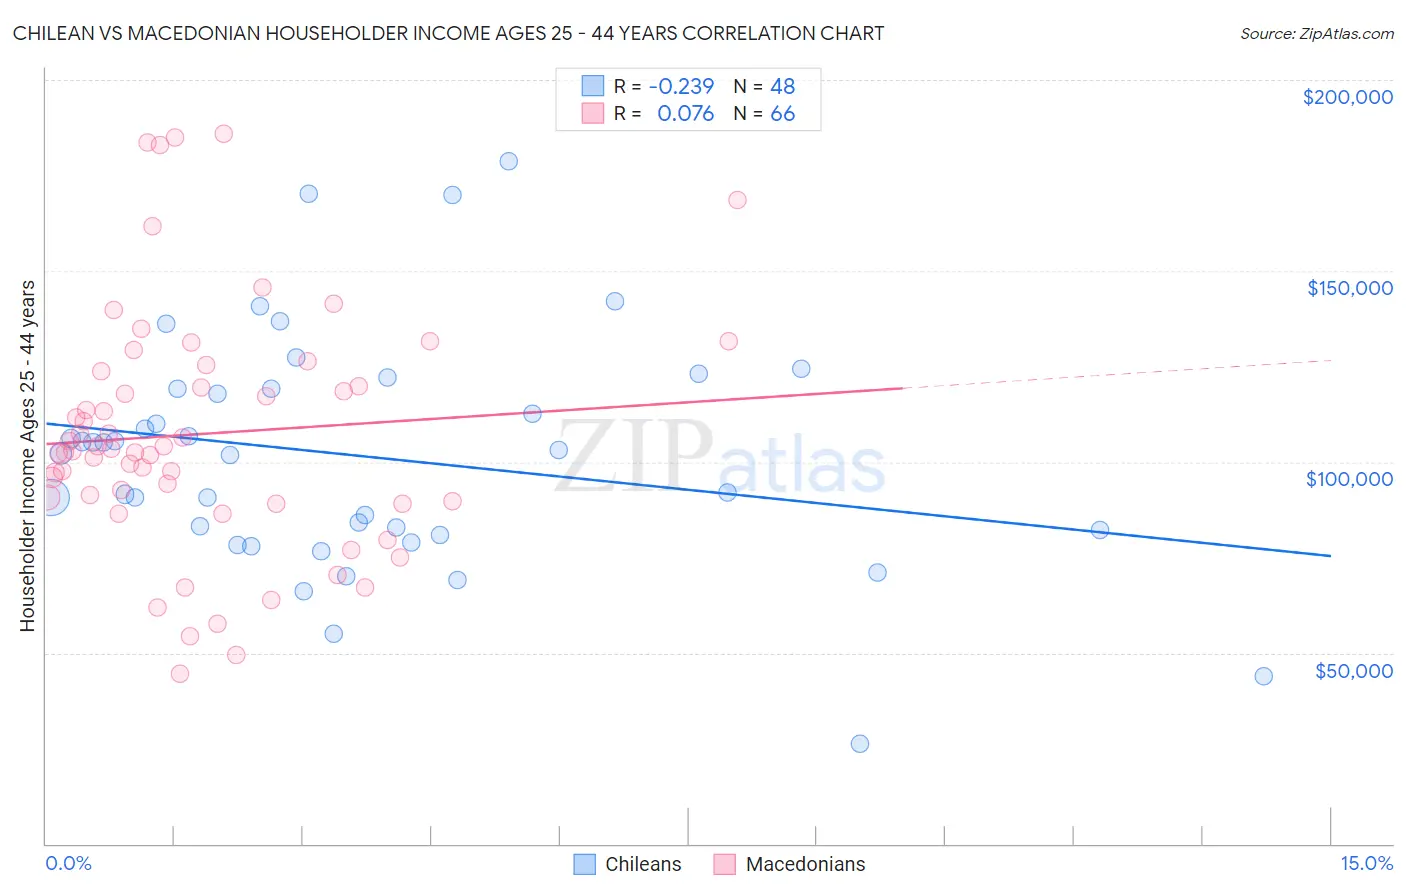 Chilean vs Macedonian Householder Income Ages 25 - 44 years